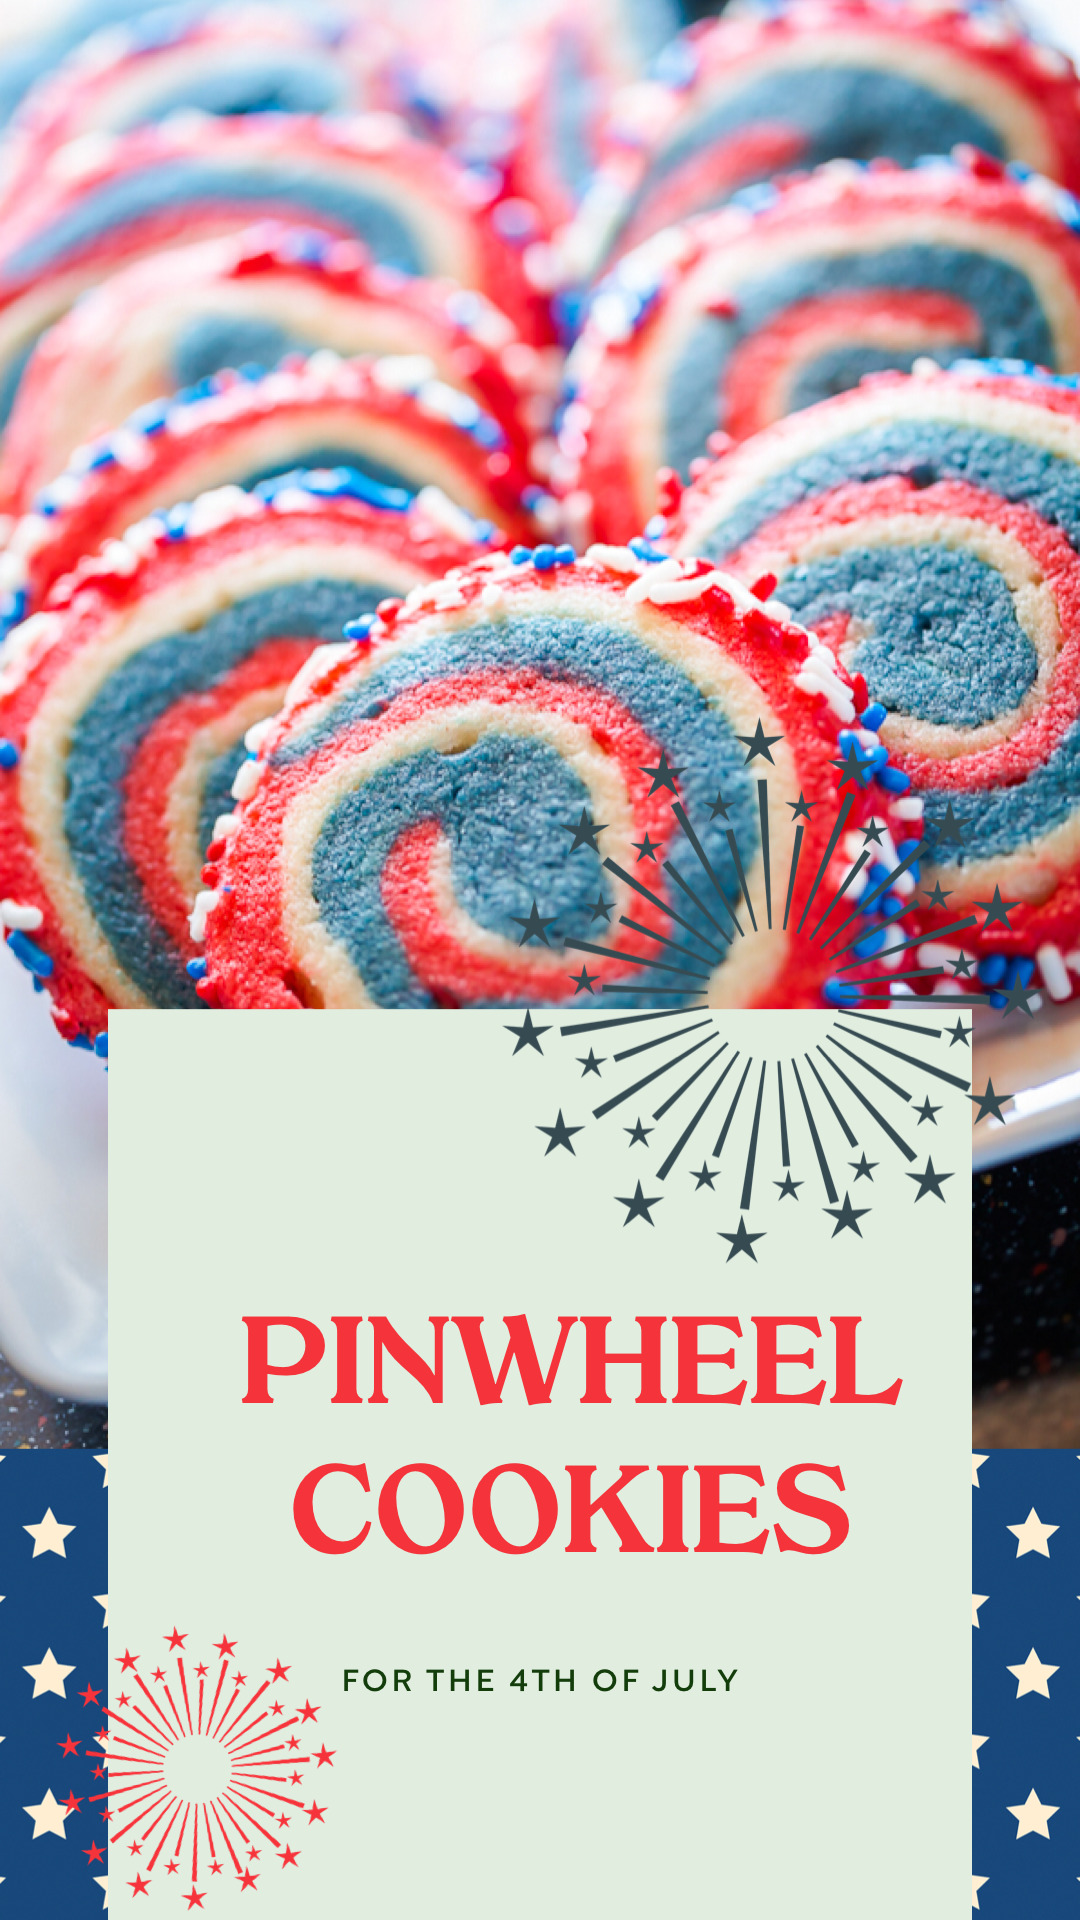 Pinwheel Cookies for the 4th of July